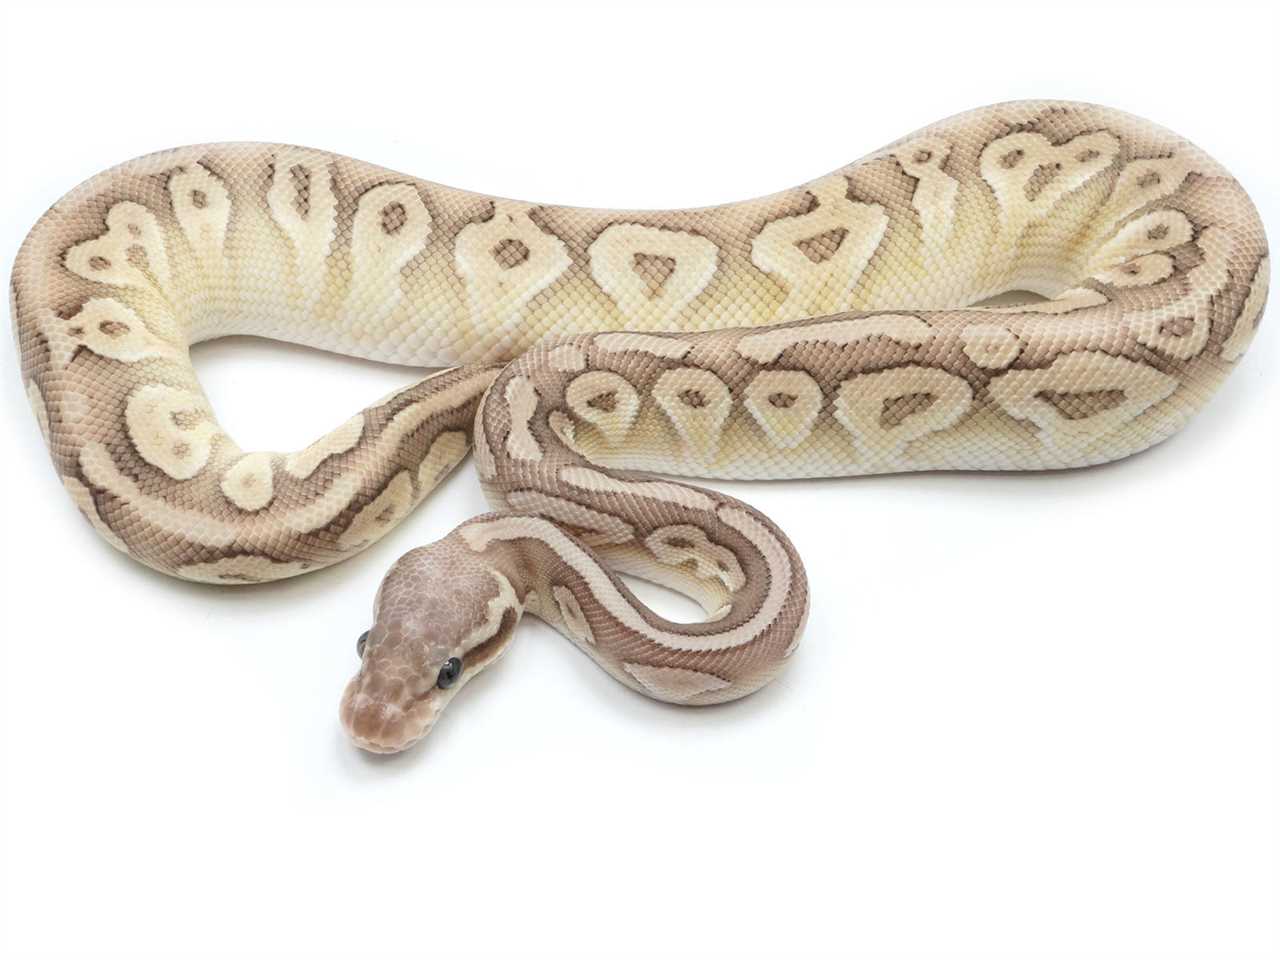 7. Are there any potential health issues that super fire ball pythons may face?